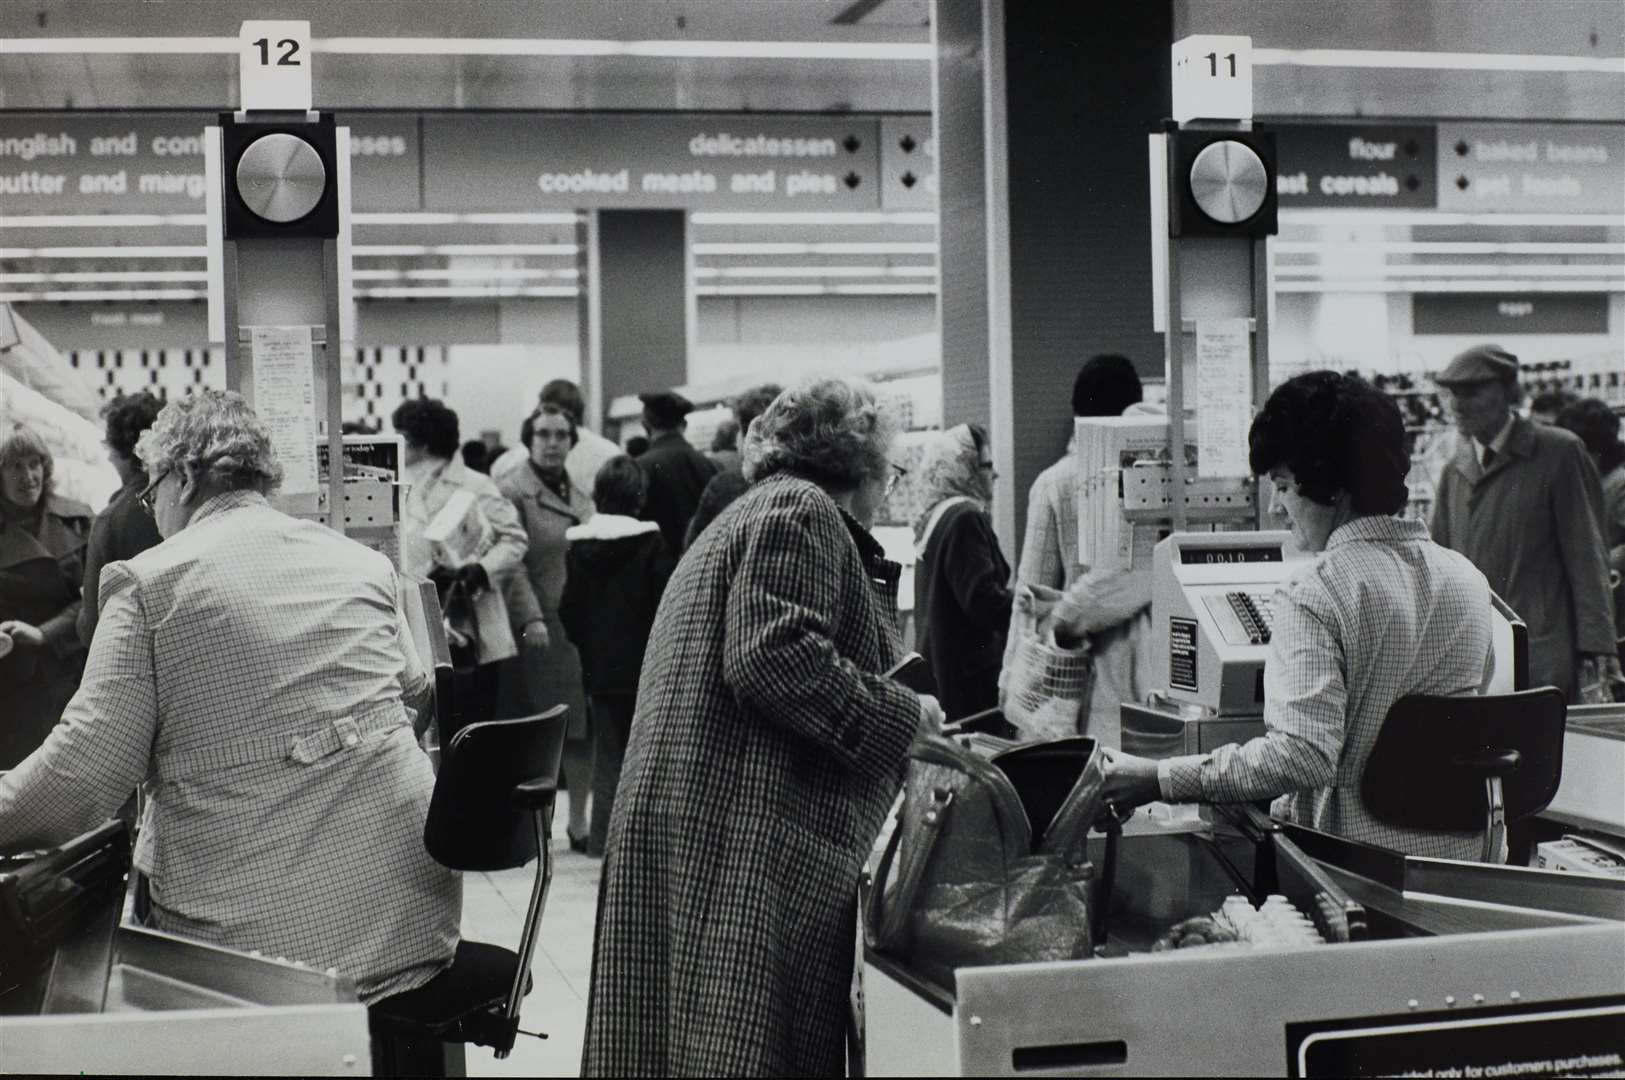 A busy day at the tills at the Sainsbury's store at the Stoneborough Centre in 1976. Picture: The Sainsbury Archive, Museum of London Docklands